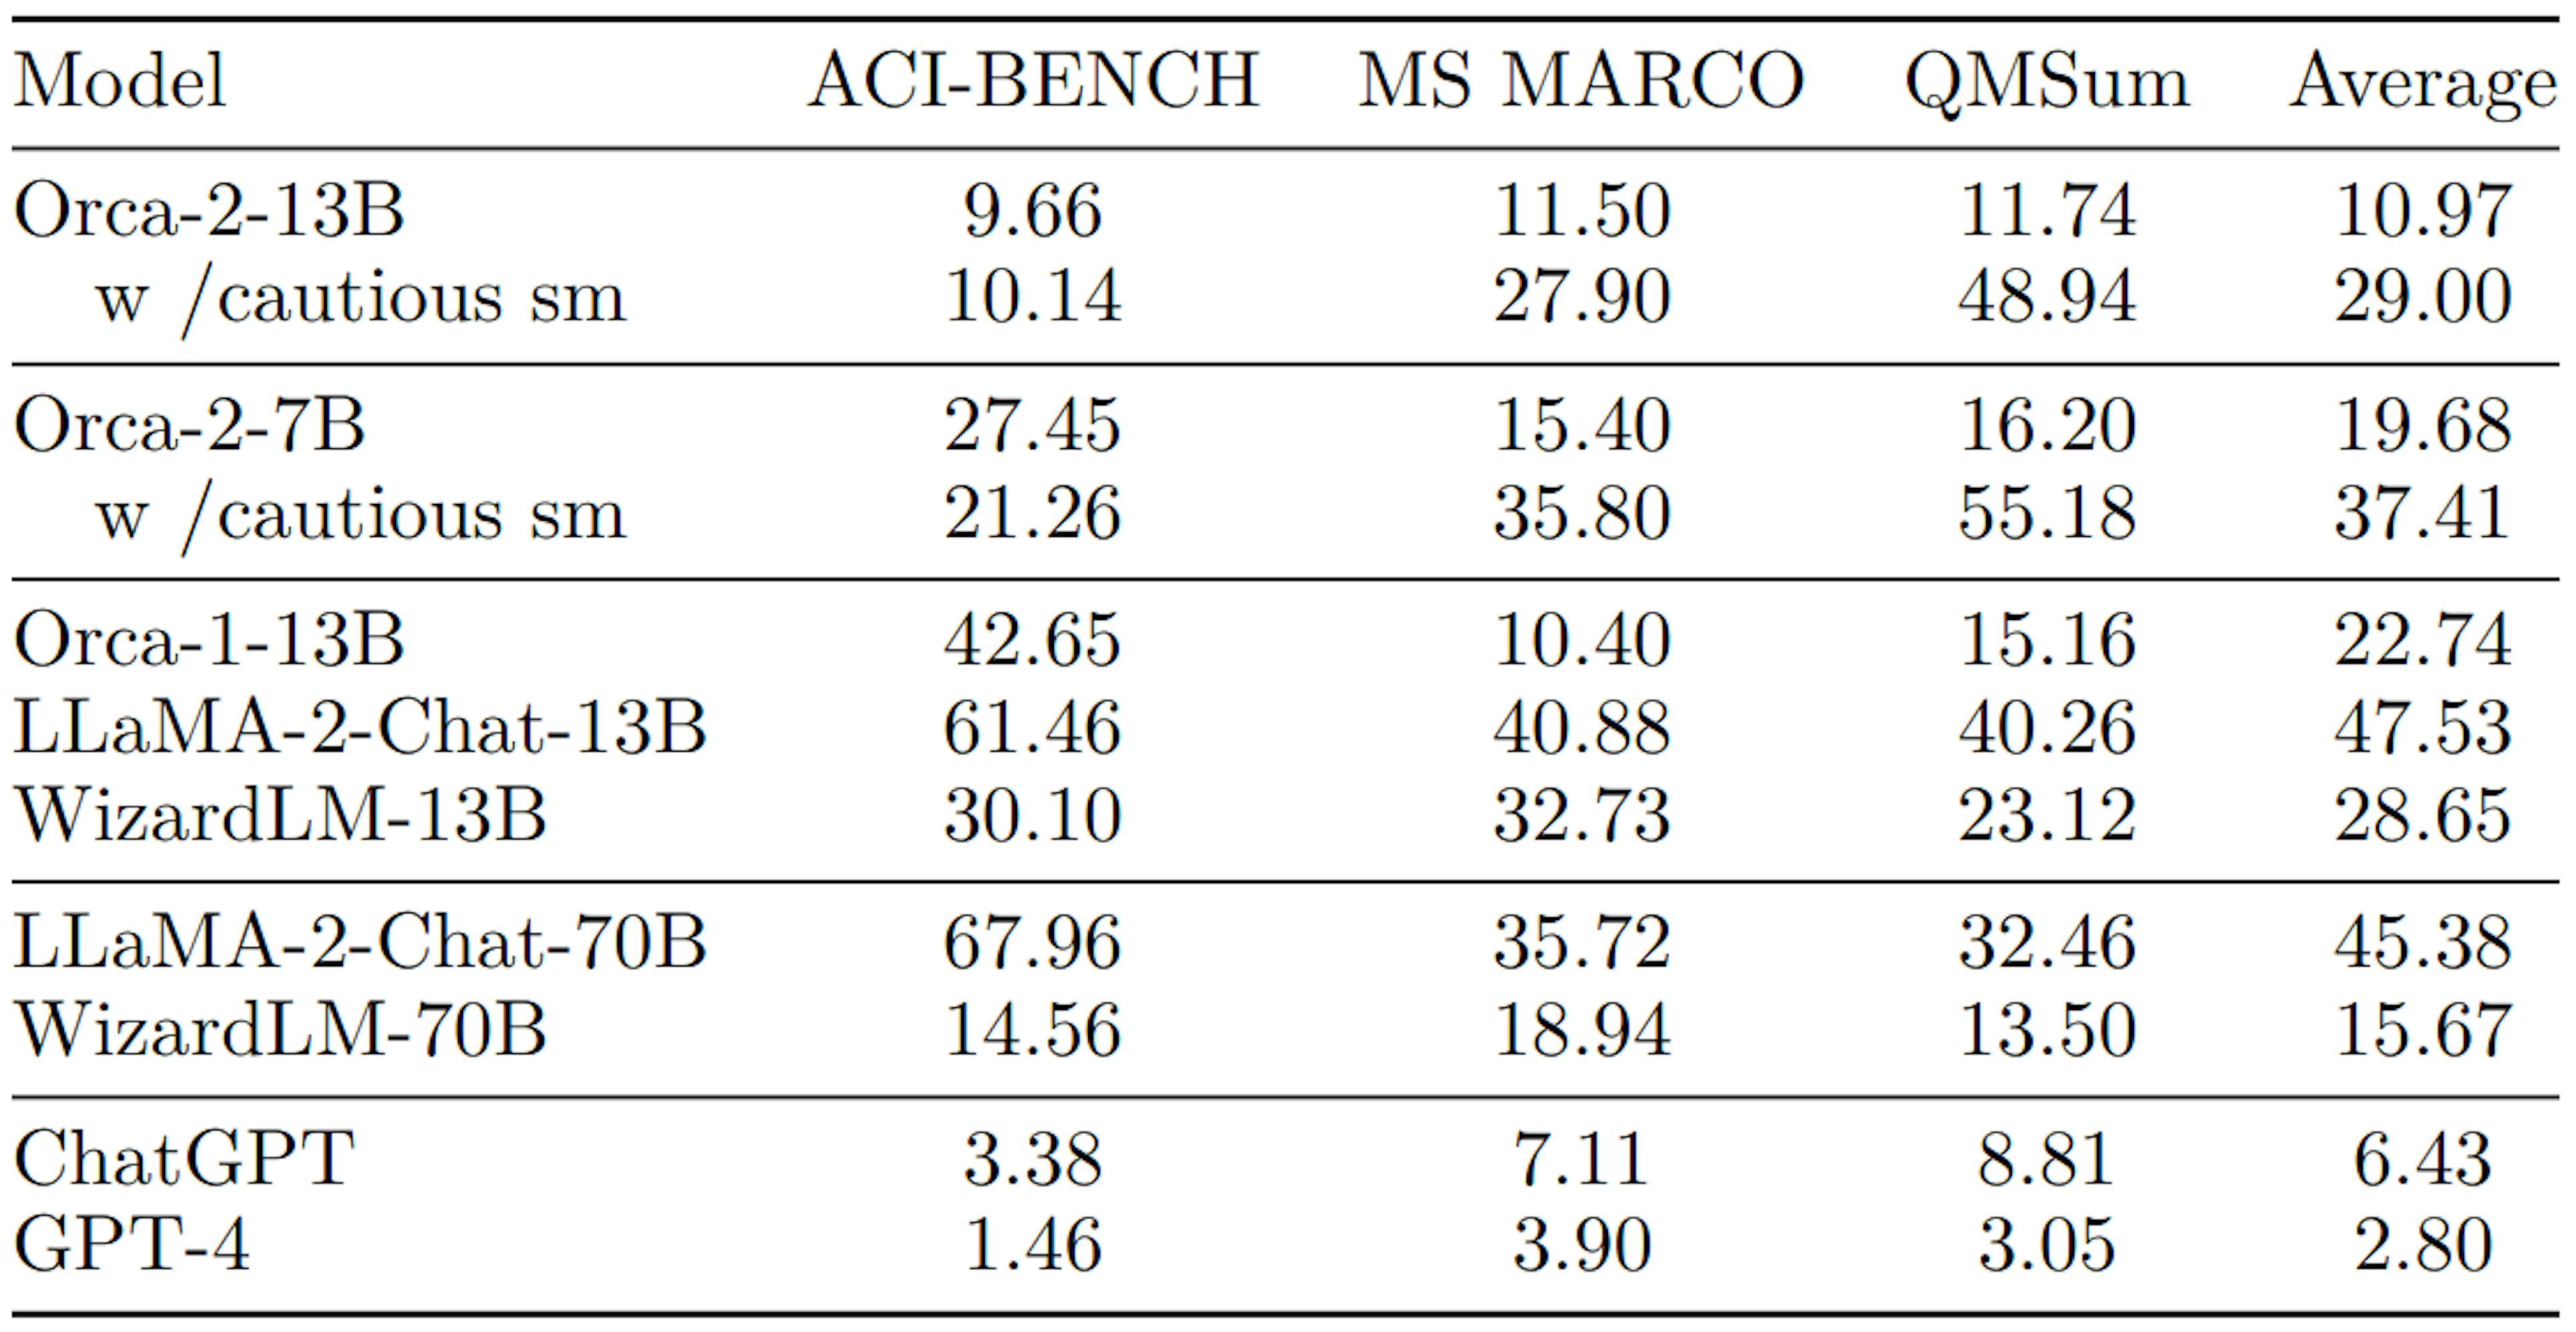 Table 11: The hallucination rate evaluated by GPT-4 as the judge with a lower rate indicating better performance. The upper segment of the table provides a comparative analysis of 13B and 7B versions of Orca 2. The lower segment presents baseline models. Among all versions of Orca 2 and models of comparable size, Orca-2-13B emerges as the most effective model.